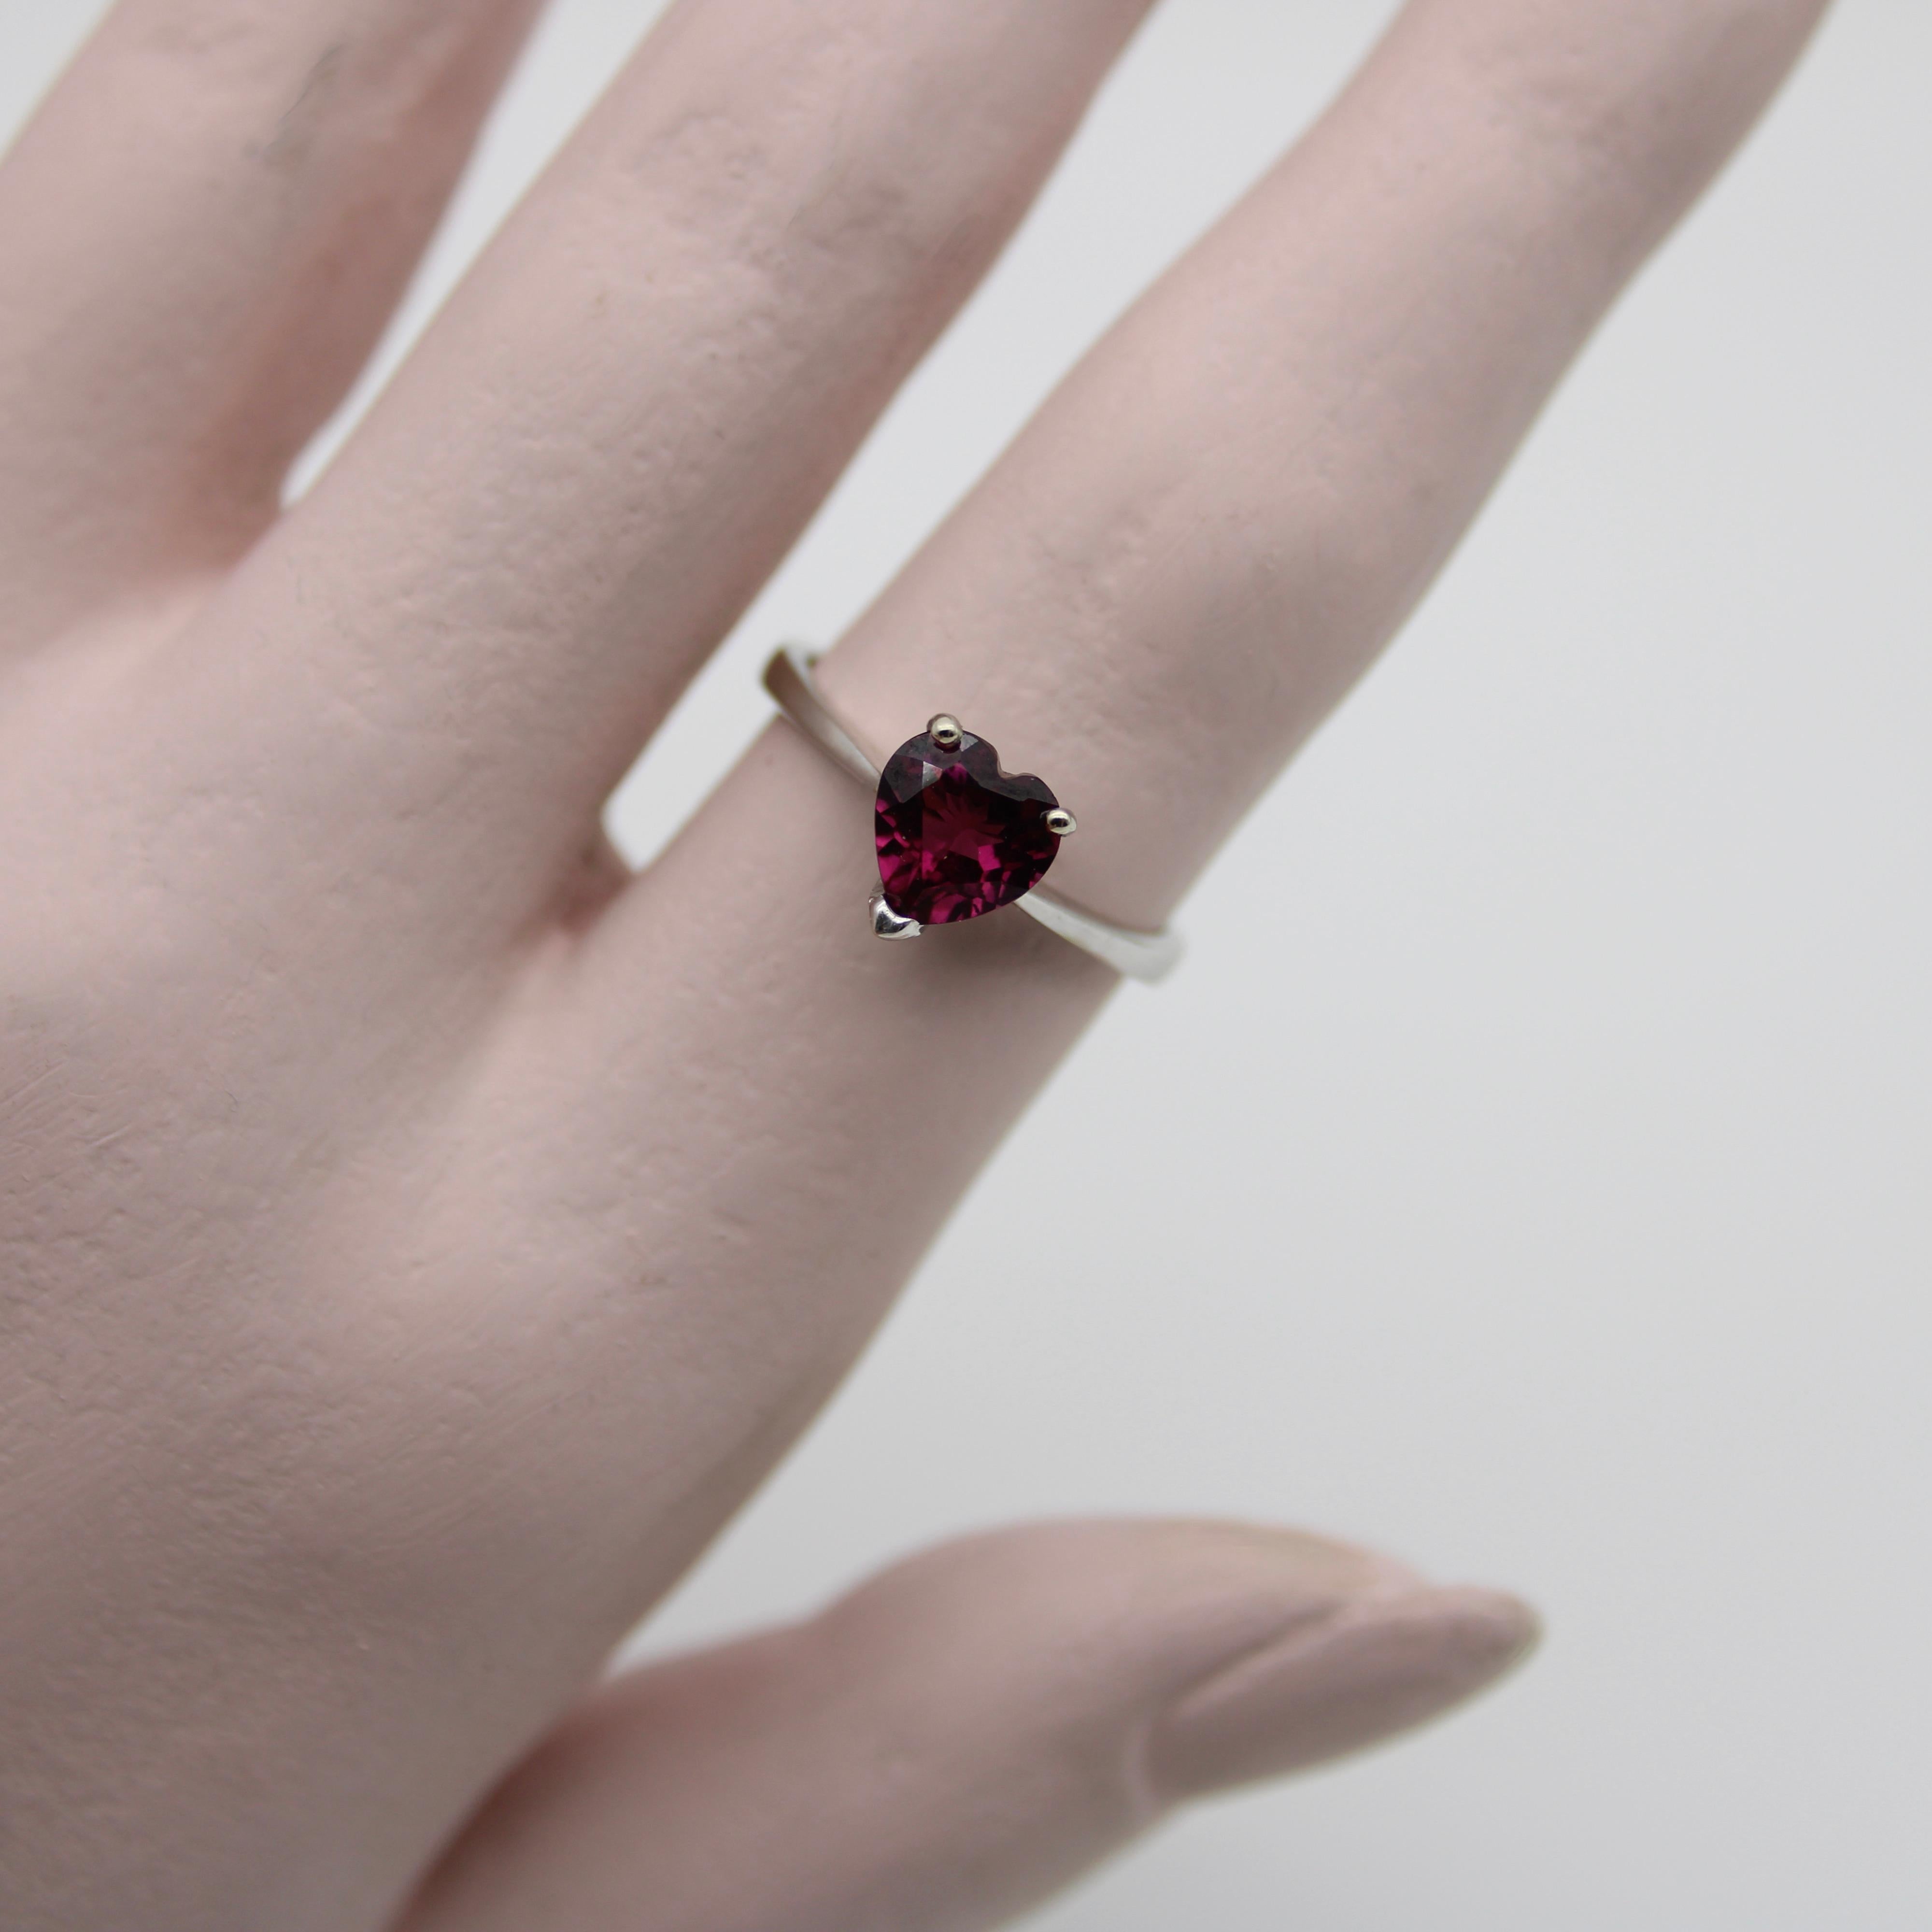 Contemporary 18K White Gold Heart Shaped Garnet Ring In Excellent Condition For Sale In Venice, CA